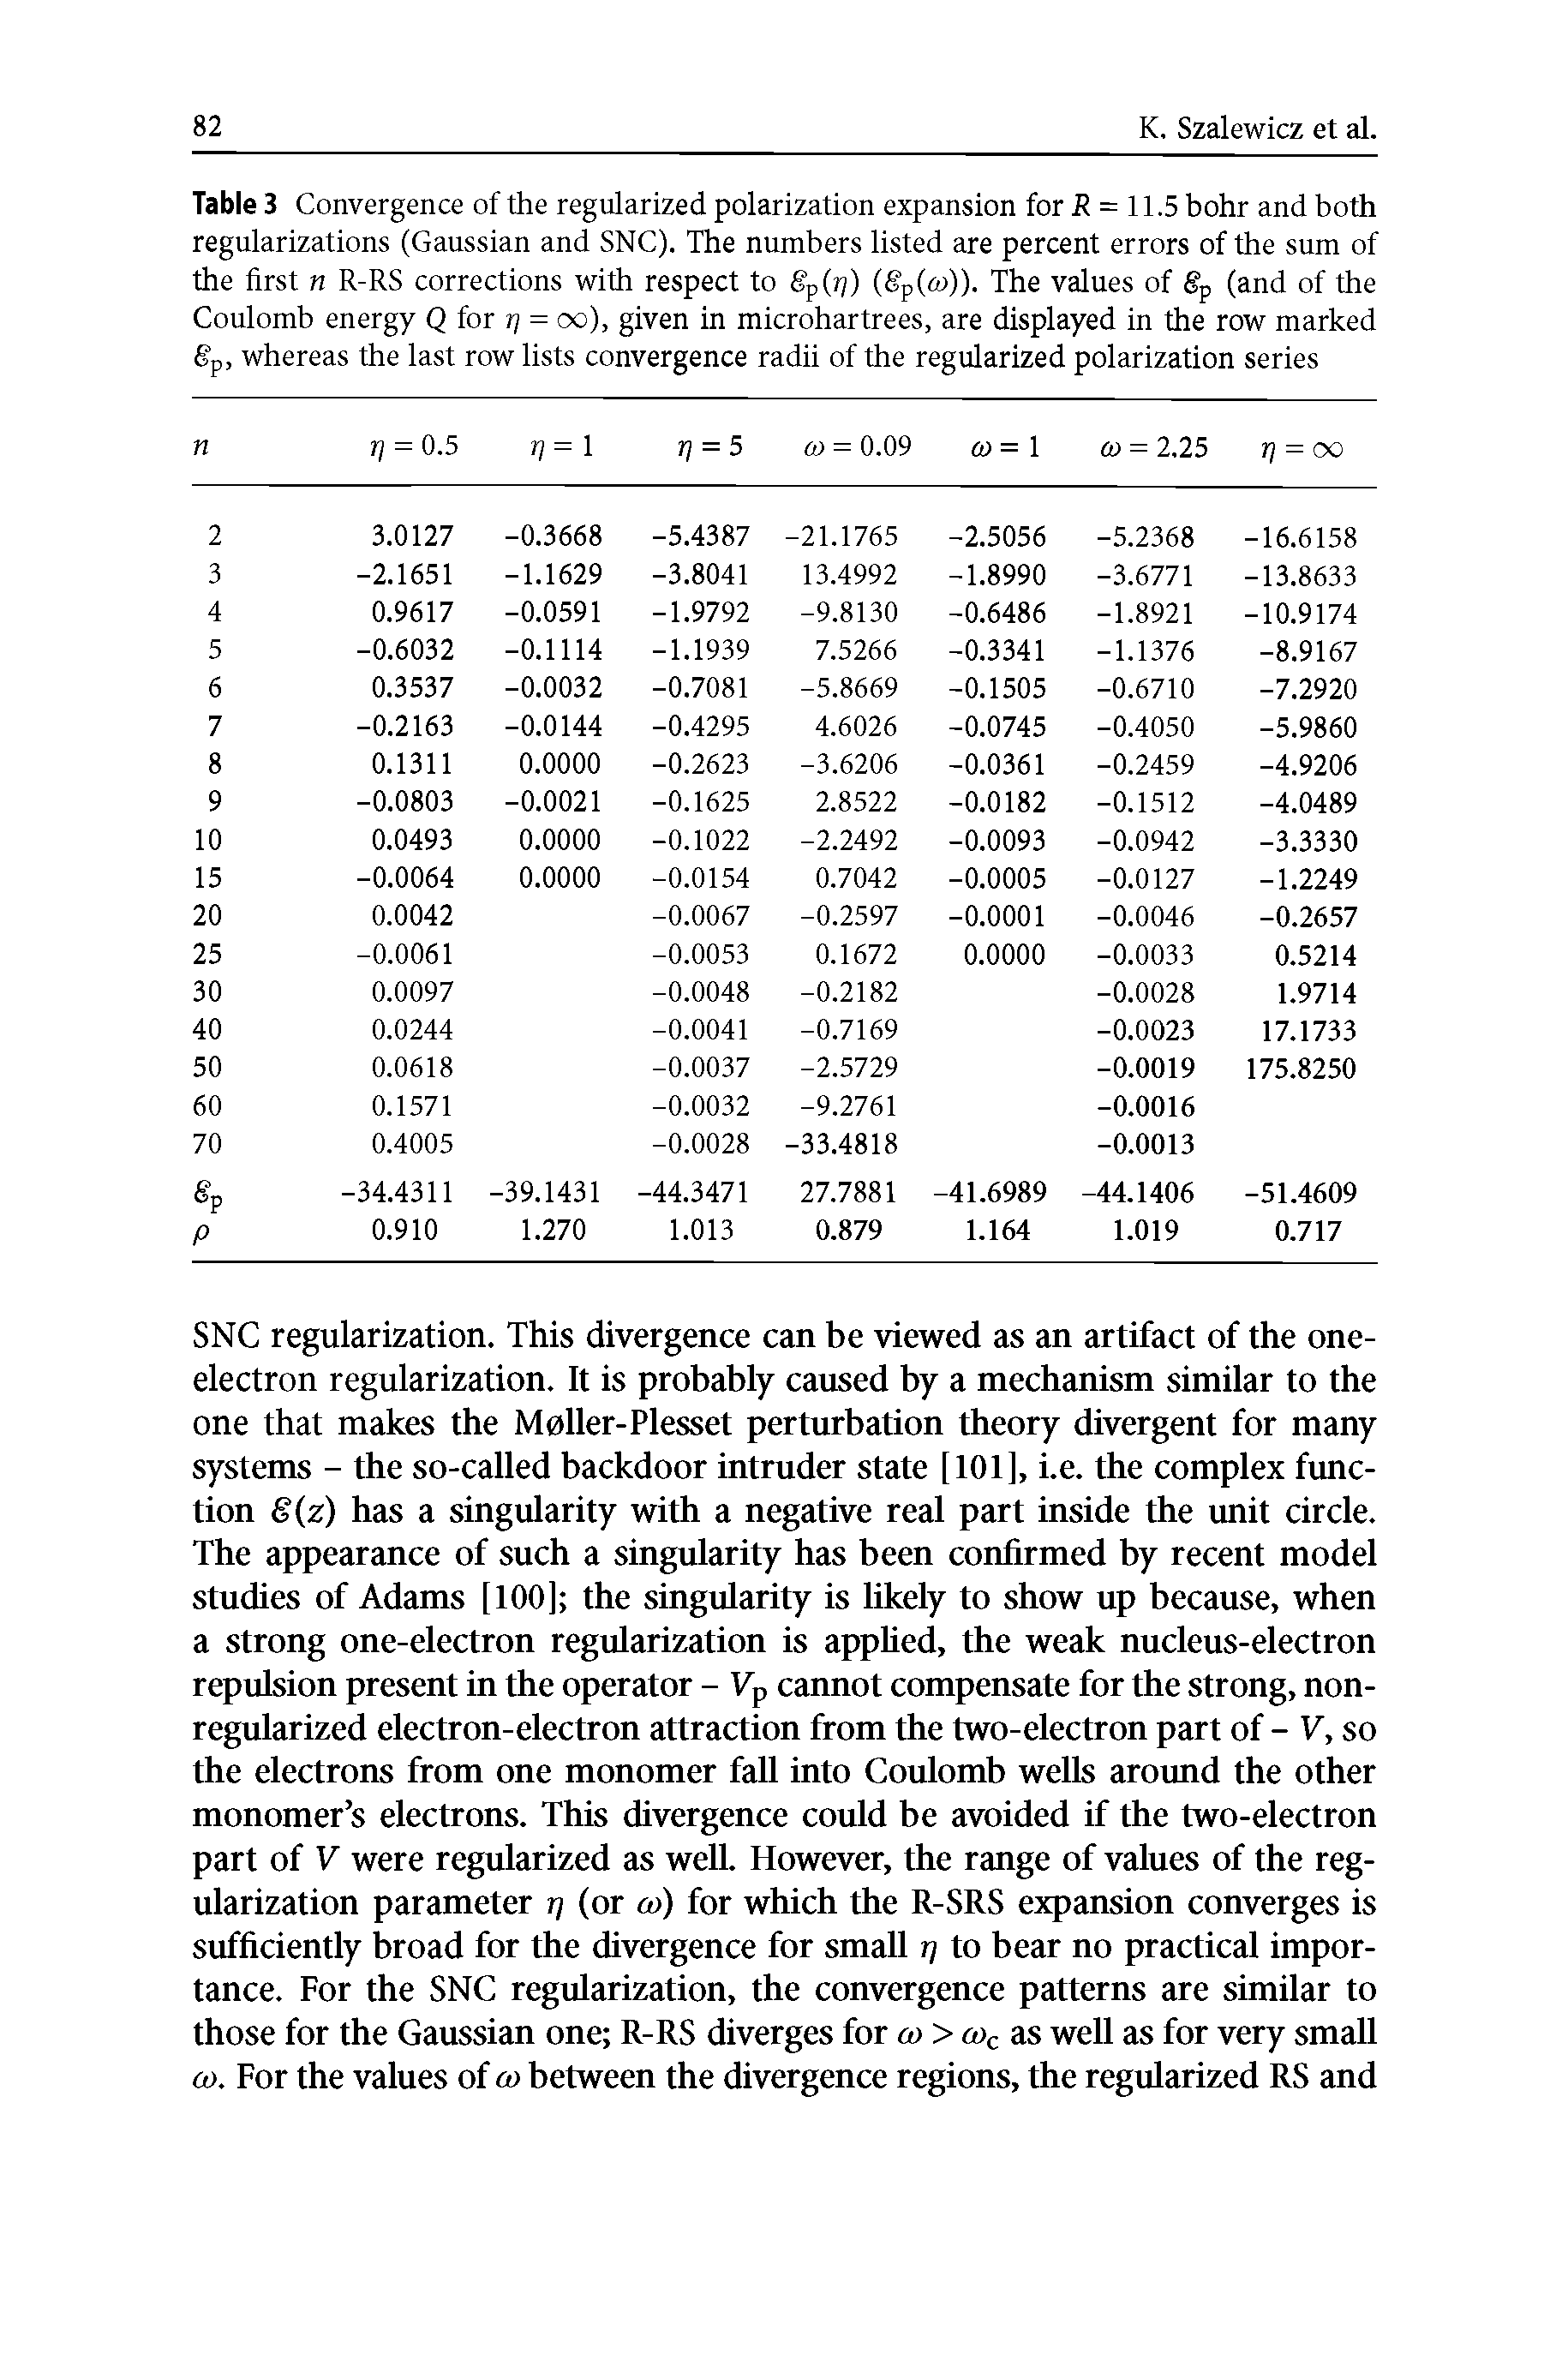 Table 3 Convergence of the regularized polarization expansion for J = 11.5 bohr and both regularizations (Gaussian and SNC). The numbers listed are percent errors of the sum of the first n R-RS corrections with respect to 6 p(/j) (gp( )). The values of gp (and of the Coulomb energy Q for = oo), given in microhartrees, are displayed in the row marked gp, whereas the last row lists convergence radii of the regularized polarization series ...